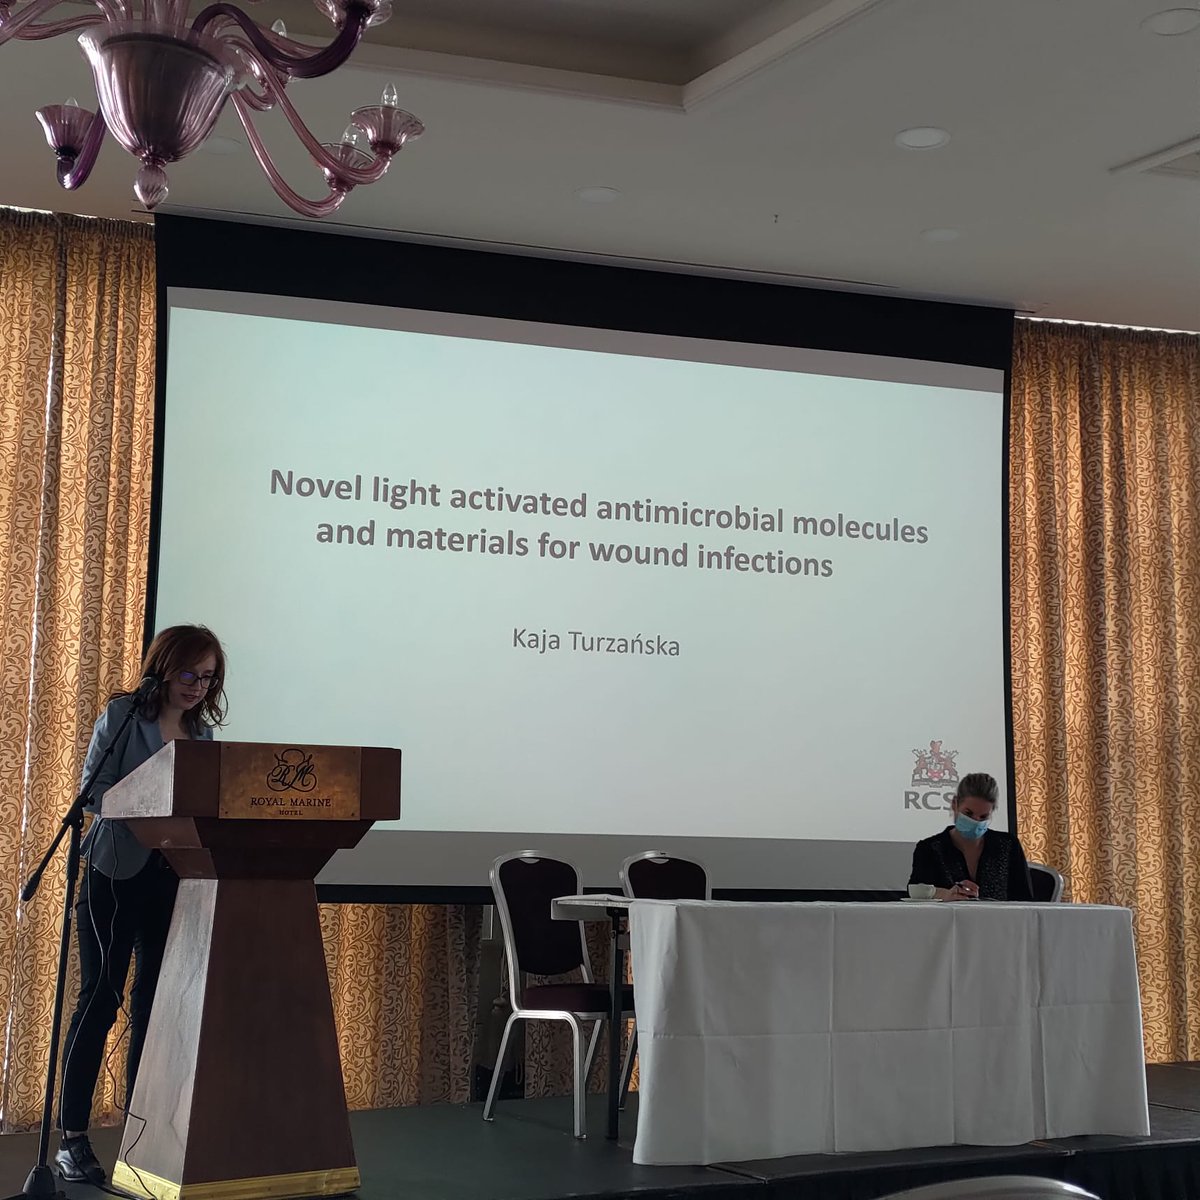 #ISCMSpring22 First in person presentation of @scienceirel funded work on light-activated #antimicrobials by PhD scholar Kaja Turzańska @RCSI_postgrad with @Dfitzhughes and @PryceGroup @iscm_micro 👏👏